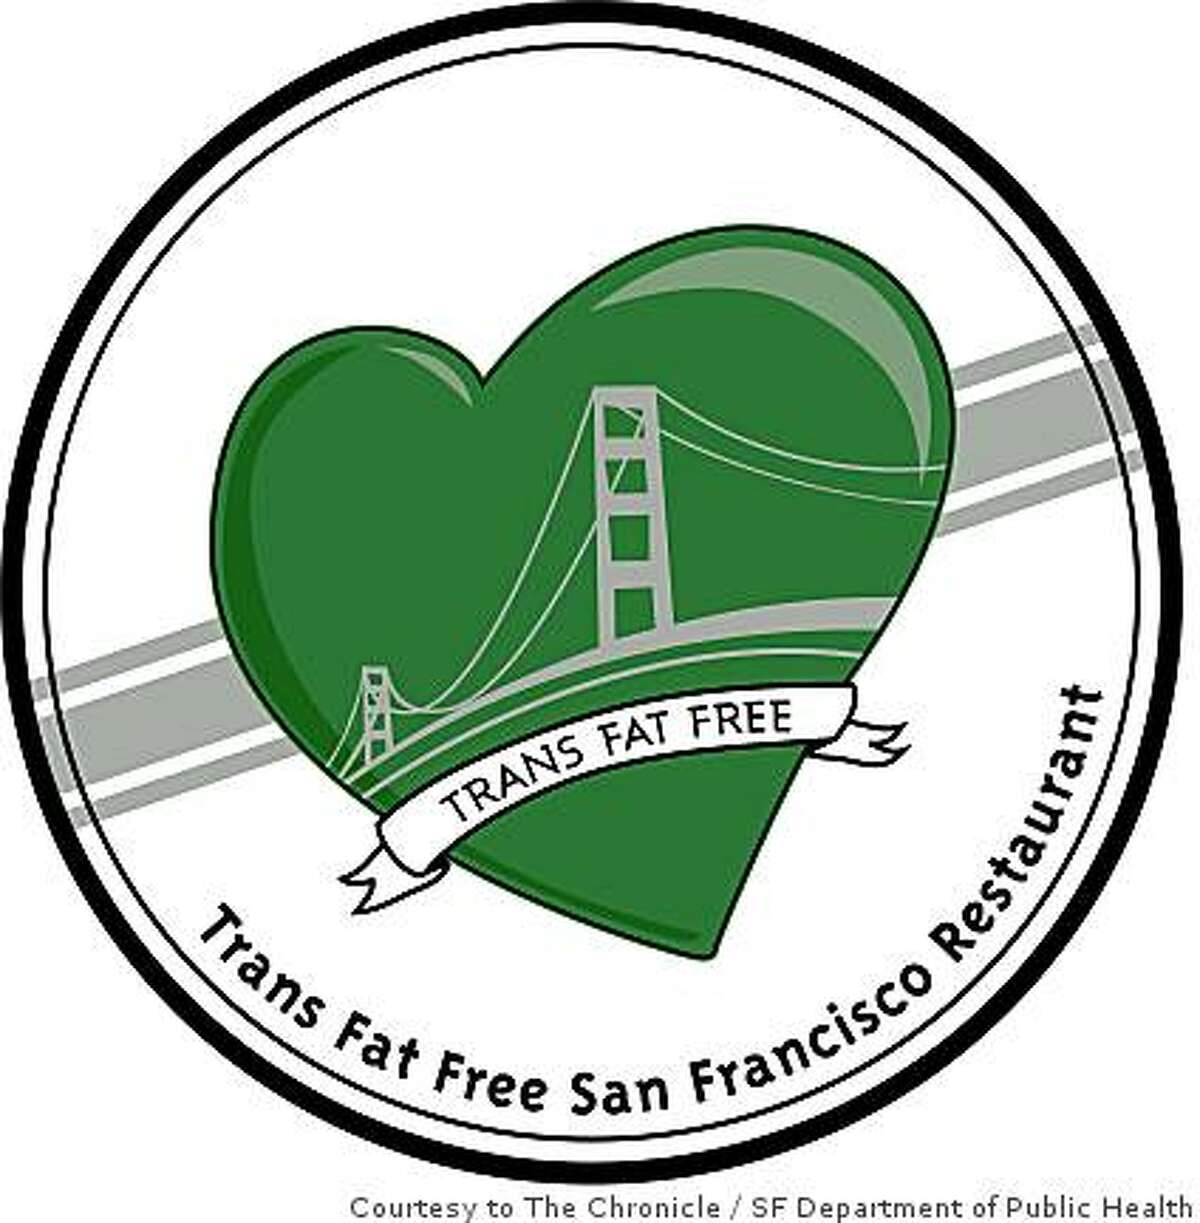 Restaurants that obtain a certification for not using trans fats will receive this decal for their windows.San Francisco Department of Public Health / Courtesy to The Chronicle